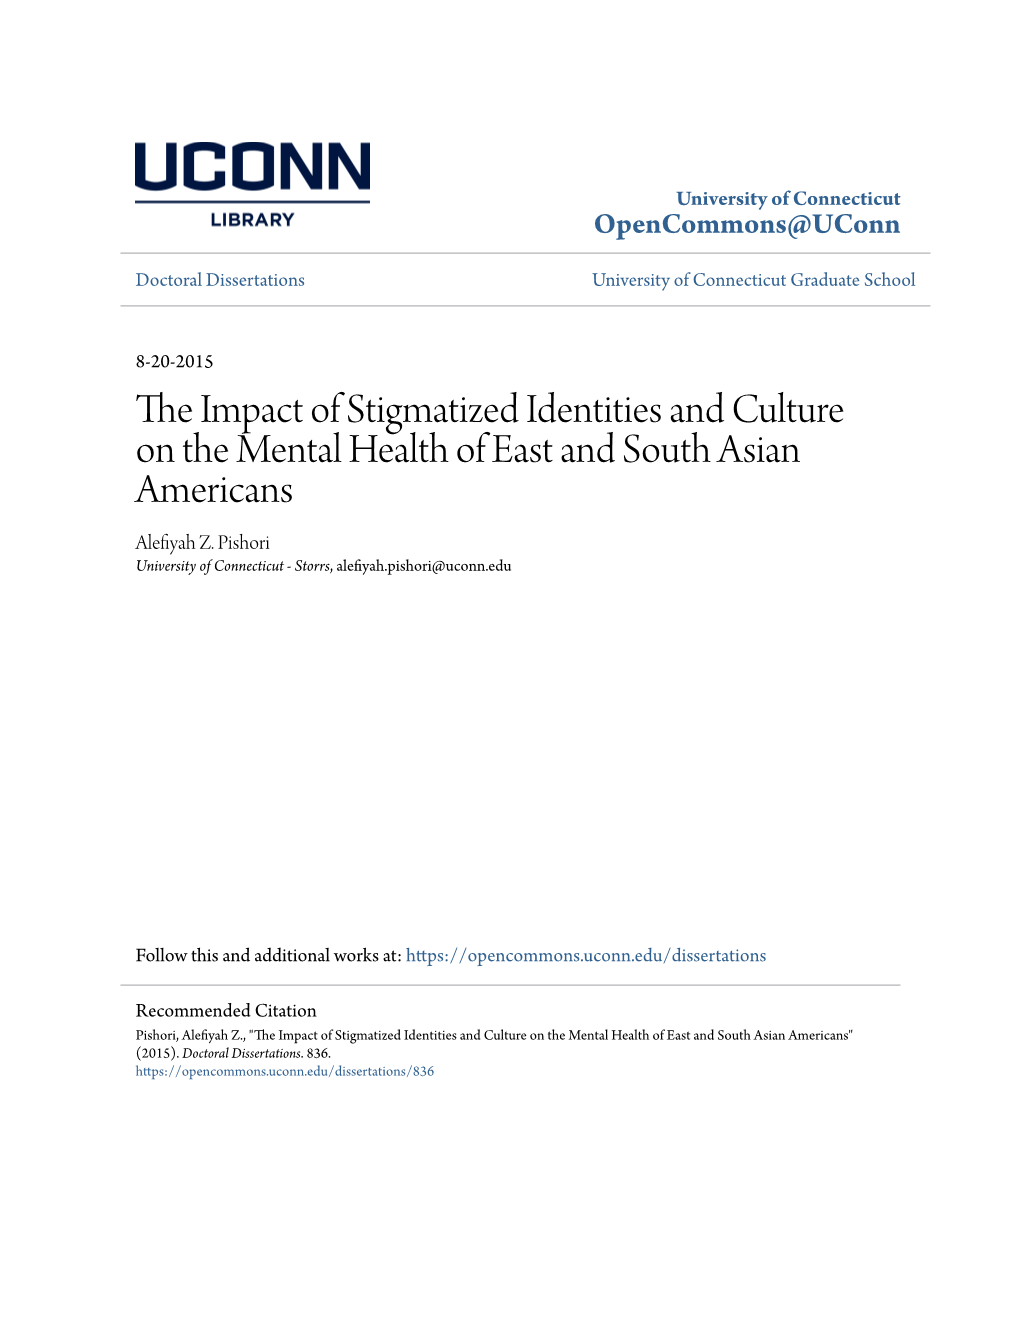 The Impact of Stigmatized Identities and Culture on the Mental Health of East and South Asian